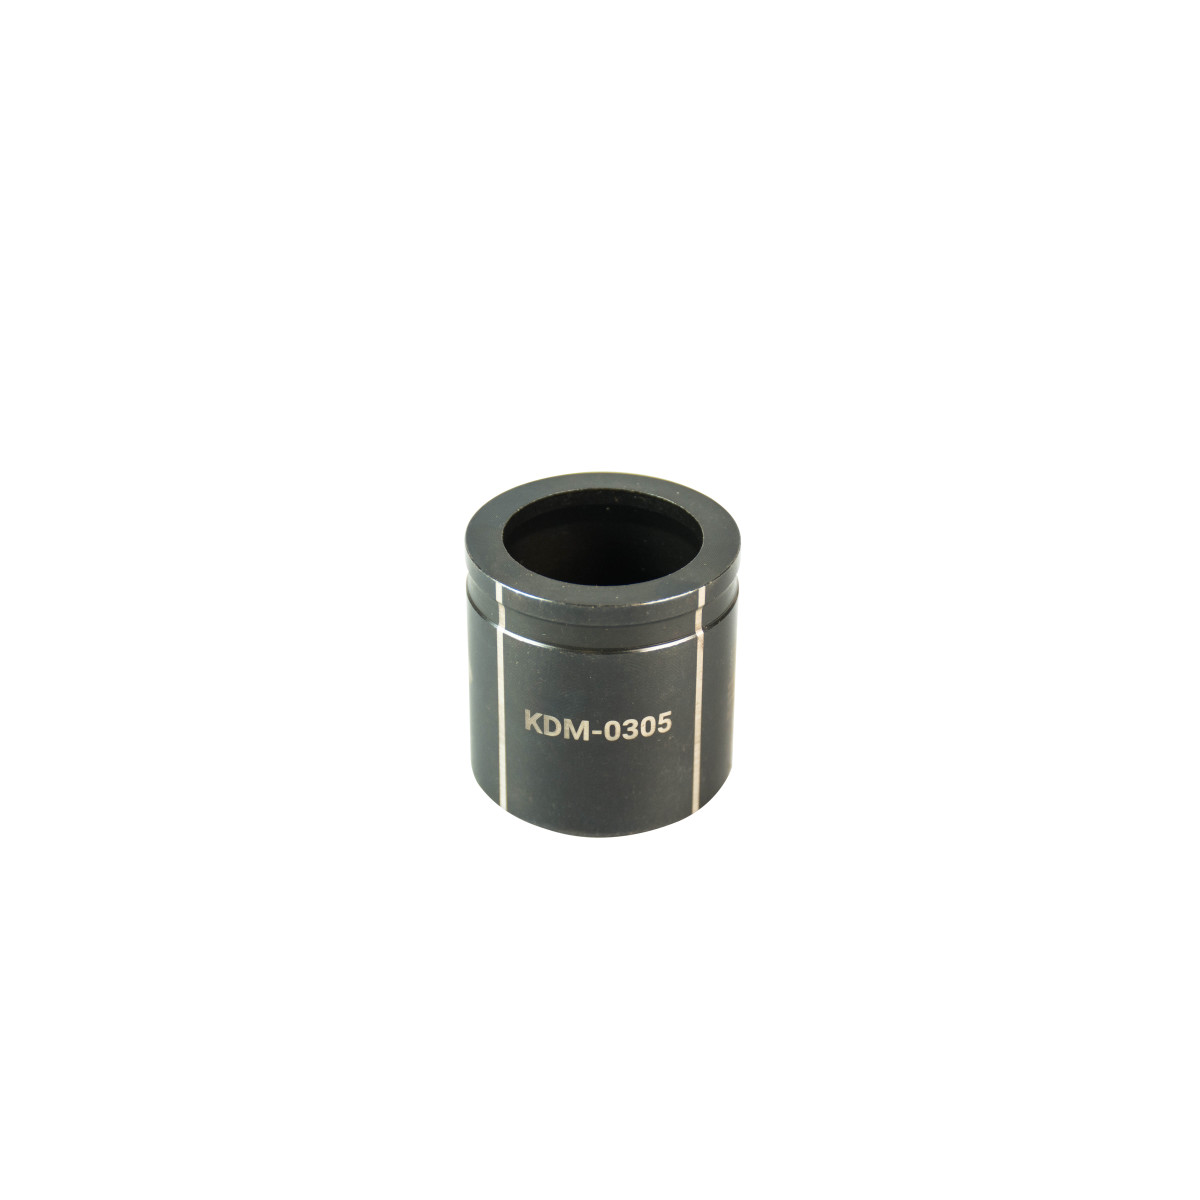 30.5 mm Knockout Die.  Optimized for widest range of materials and drivers.  Alignment markings for improved accuracy.  Laser markings for quick part identification.  Made in USA